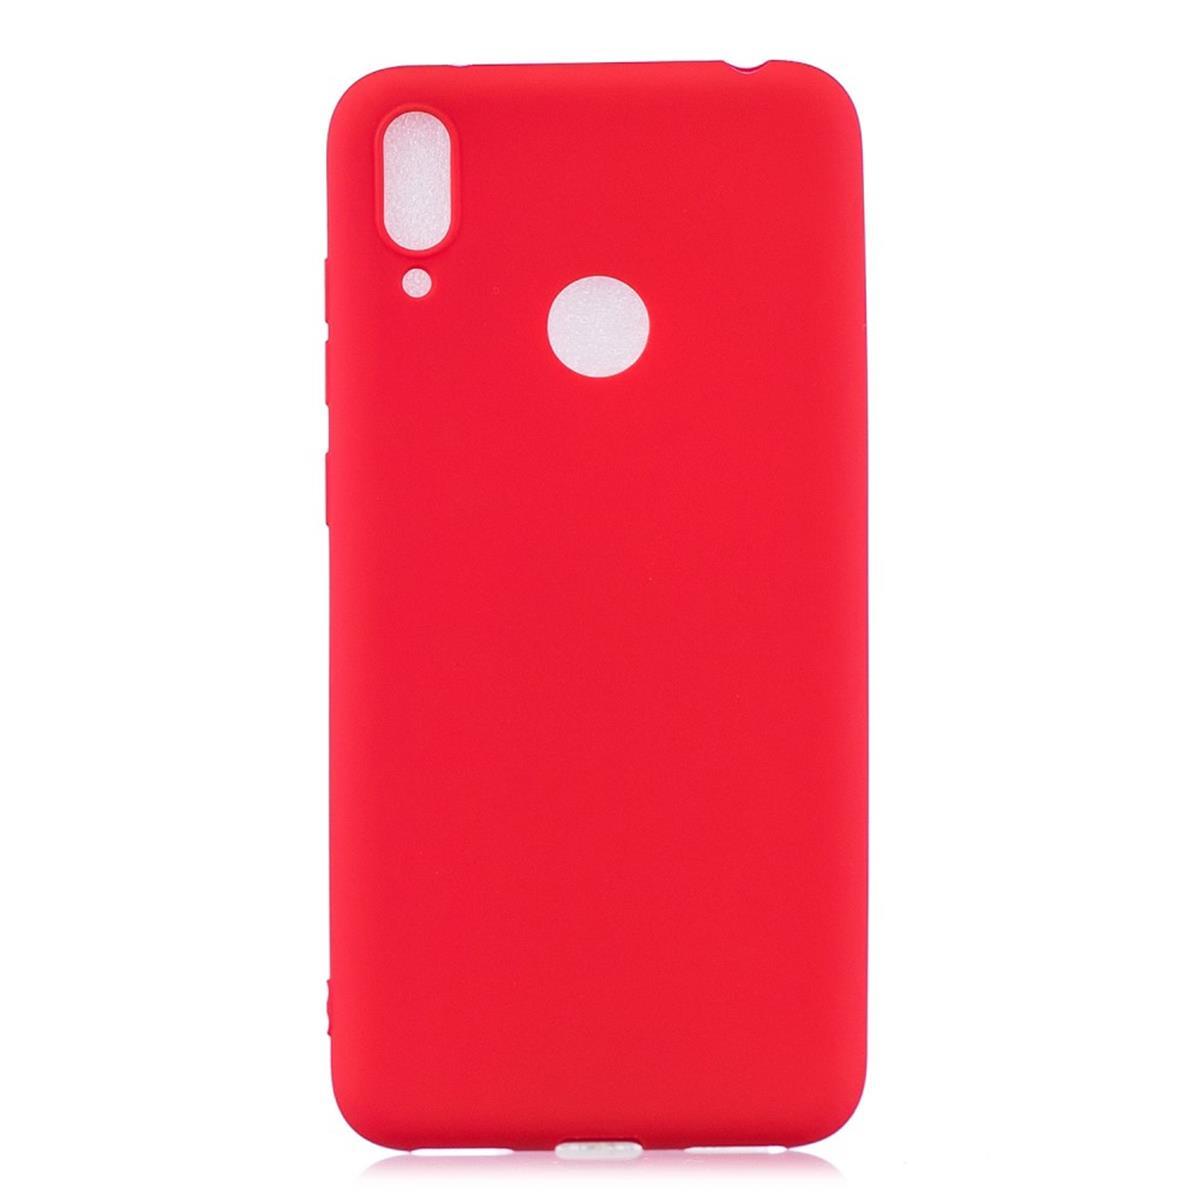 Handycase (2019), Huawei, Rot aus COVERKINGZ Y7 Backcover, Silikon,